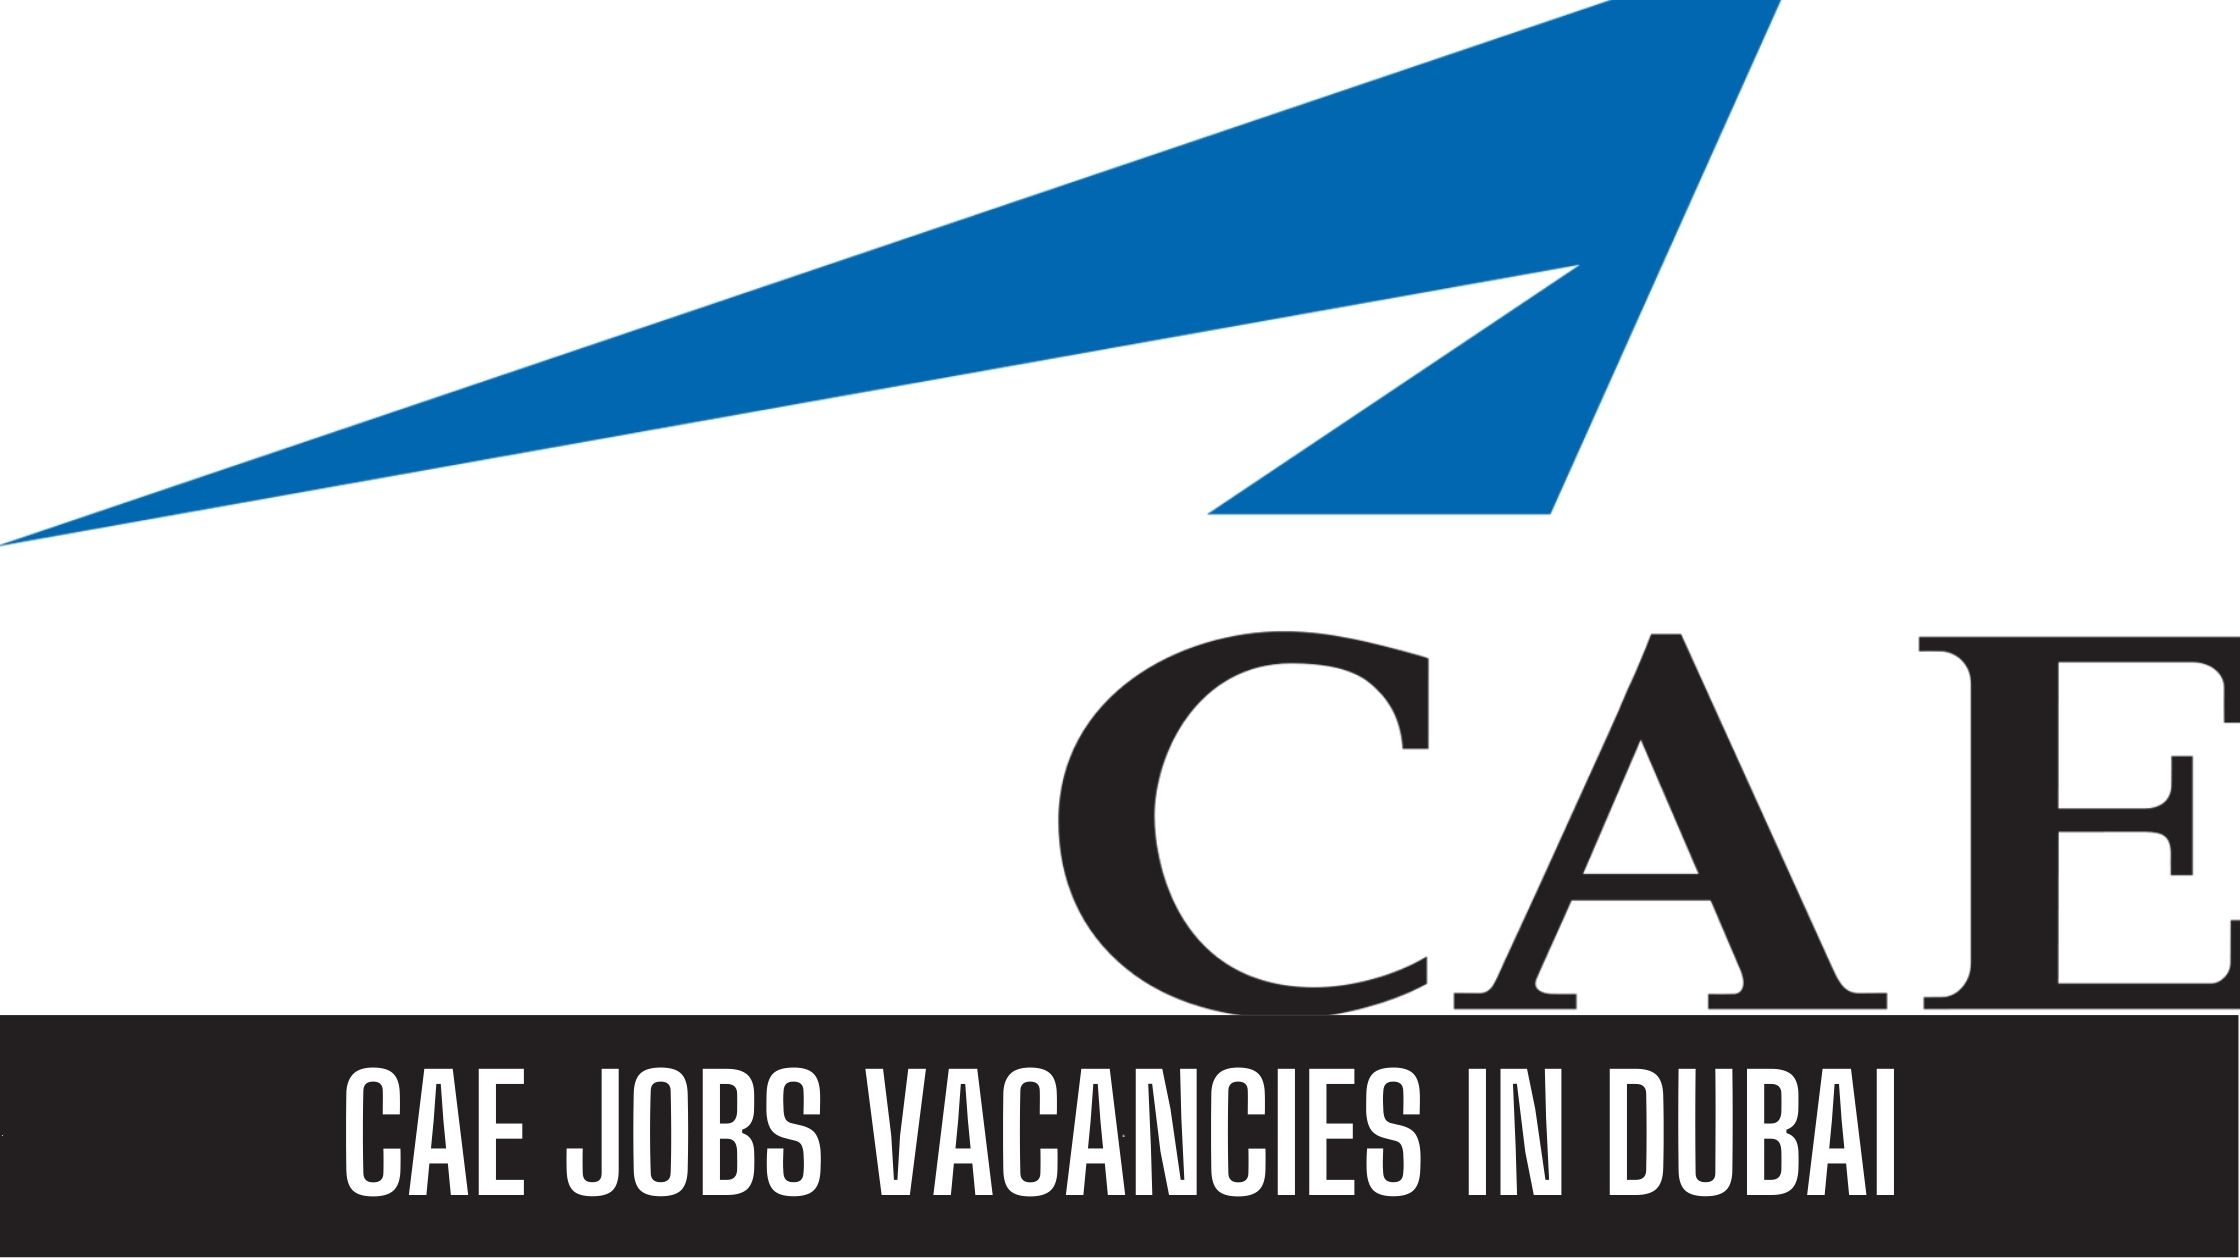 CAE UAE Jobs Opportunities Available Now Good Salary and Other Benefits